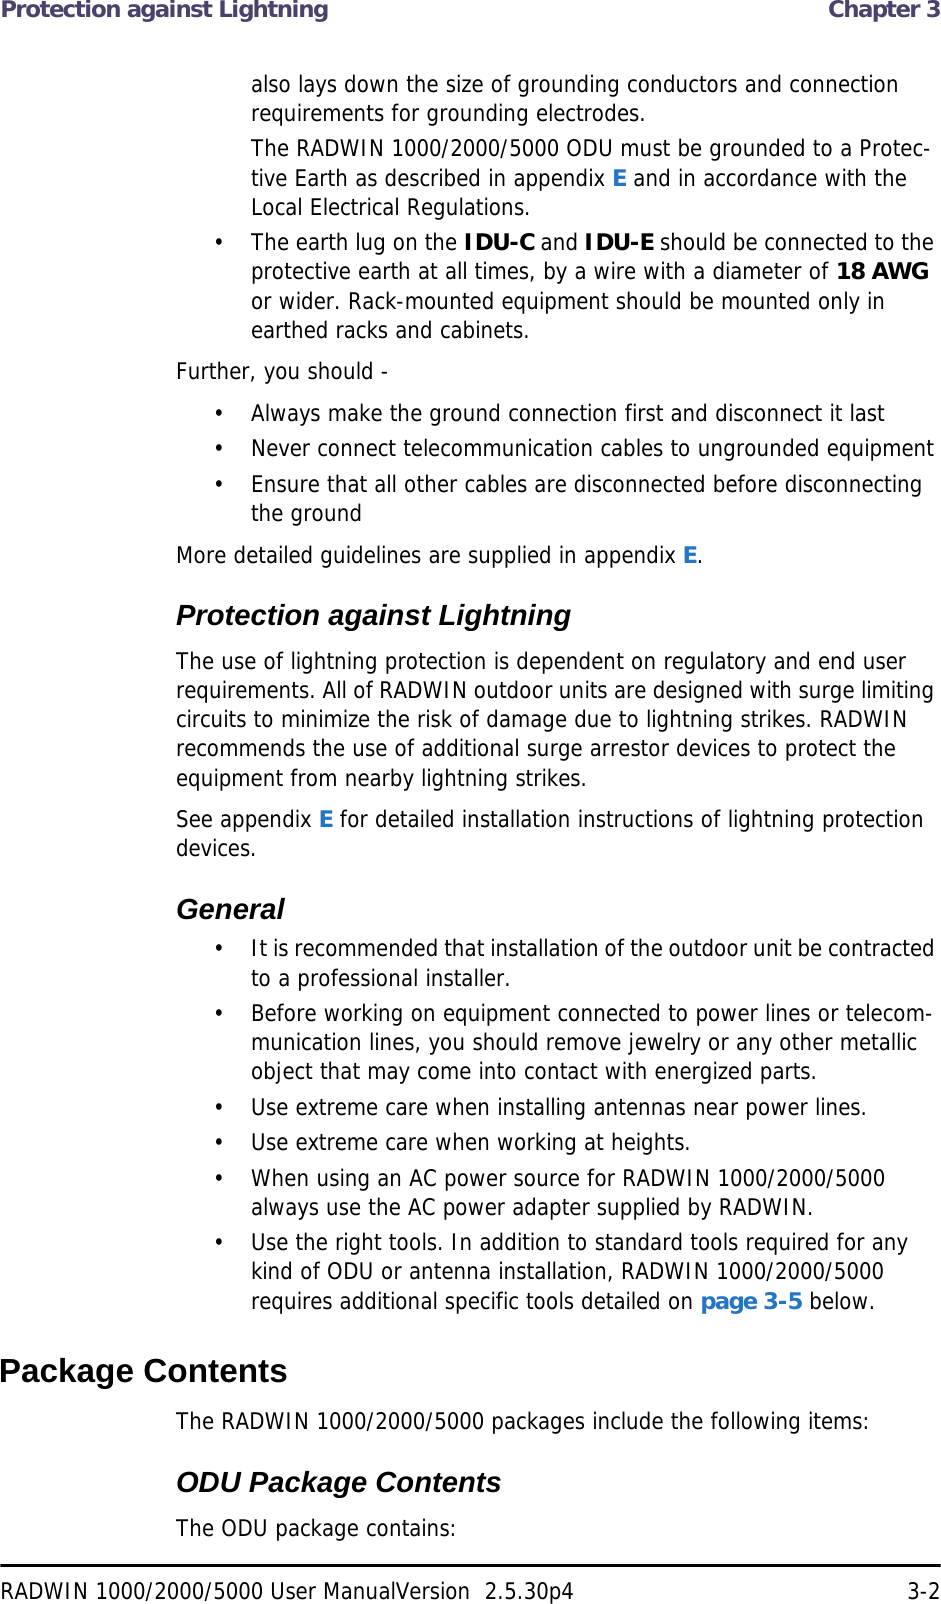 Protection against Lightning  Chapter 3RADWIN 1000/2000/5000 User ManualVersion  2.5.30p4 3-2also lays down the size of grounding conductors and connection requirements for grounding electrodes.The RADWIN 1000/2000/5000 ODU must be grounded to a Protec-tive Earth as described in appendix E and in accordance with the Local Electrical Regulations.• The earth lug on the IDU-C and IDU-E should be connected to the protective earth at all times, by a wire with a diameter of 18 AWG or wider. Rack-mounted equipment should be mounted only in earthed racks and cabinets.Further, you should -• Always make the ground connection first and disconnect it last• Never connect telecommunication cables to ungrounded equipment• Ensure that all other cables are disconnected before disconnecting the groundMore detailed guidelines are supplied in appendix E.Protection against LightningThe use of lightning protection is dependent on regulatory and end user requirements. All of RADWIN outdoor units are designed with surge limiting circuits to minimize the risk of damage due to lightning strikes. RADWIN recommends the use of additional surge arrestor devices to protect the equipment from nearby lightning strikes.See appendix E for detailed installation instructions of lightning protection devices.General• It is recommended that installation of the outdoor unit be contracted to a professional installer.• Before working on equipment connected to power lines or telecom-munication lines, you should remove jewelry or any other metallic object that may come into contact with energized parts.• Use extreme care when installing antennas near power lines.• Use extreme care when working at heights.• When using an AC power source for RADWIN 1000/2000/5000 always use the AC power adapter supplied by RADWIN.• Use the right tools. In addition to standard tools required for any kind of ODU or antenna installation, RADWIN 1000/2000/5000 requires additional specific tools detailed on page 3-5 below.Package ContentsThe RADWIN 1000/2000/5000 packages include the following items:ODU Package ContentsThe ODU package contains: